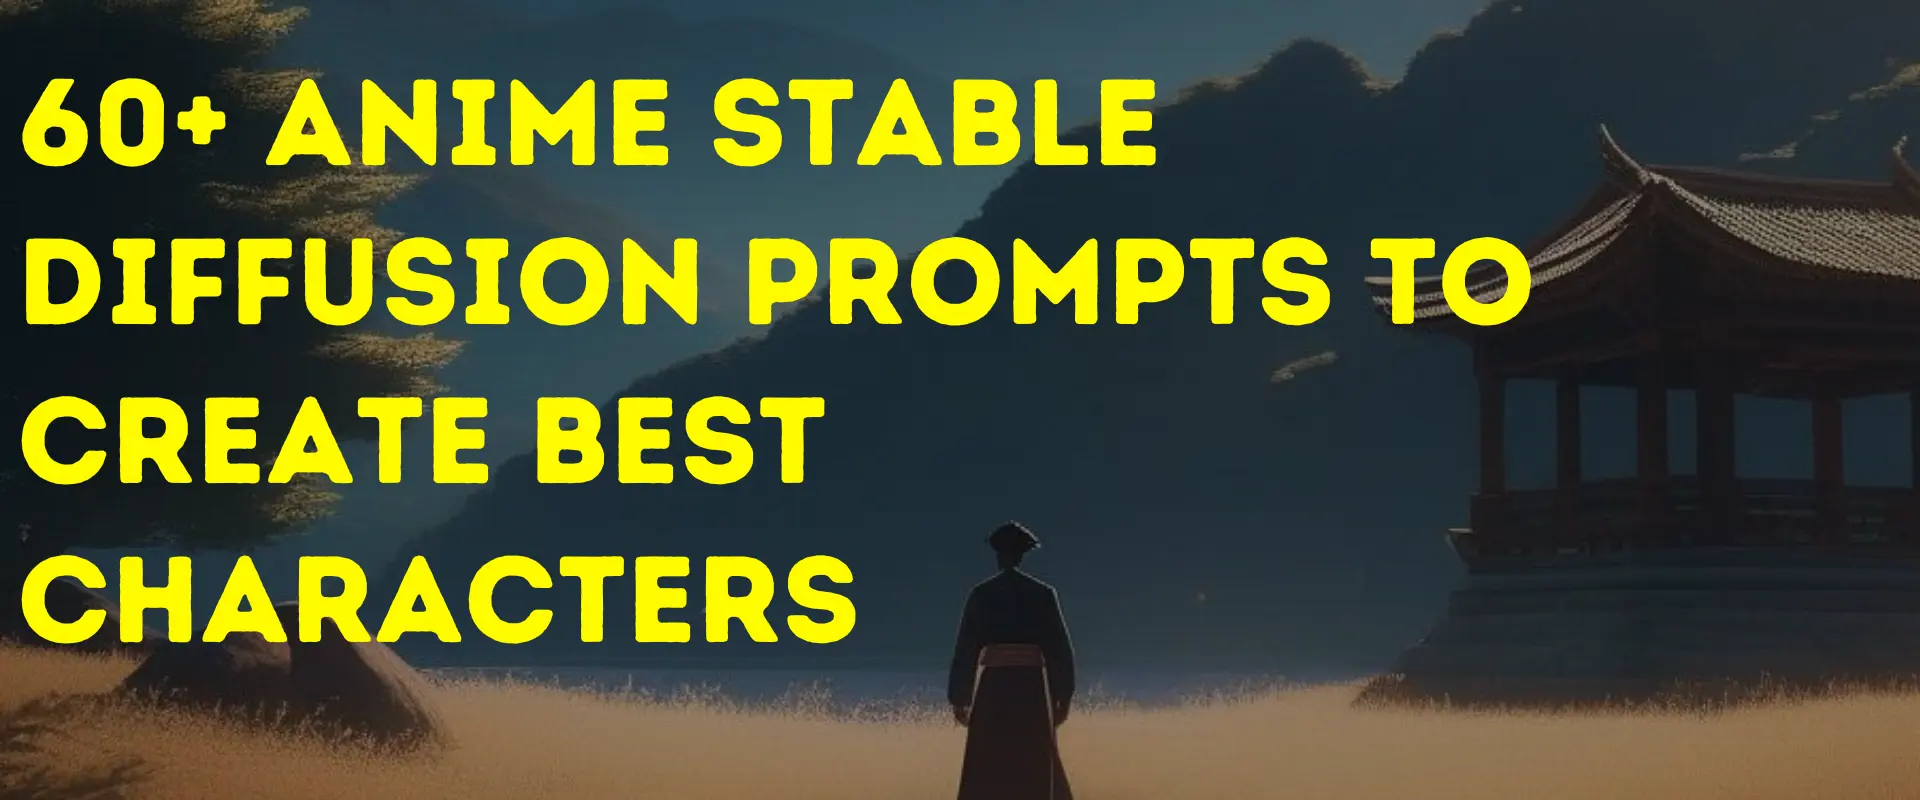 60+ Anime Stable Diffusion Prompts to Create Best Characters